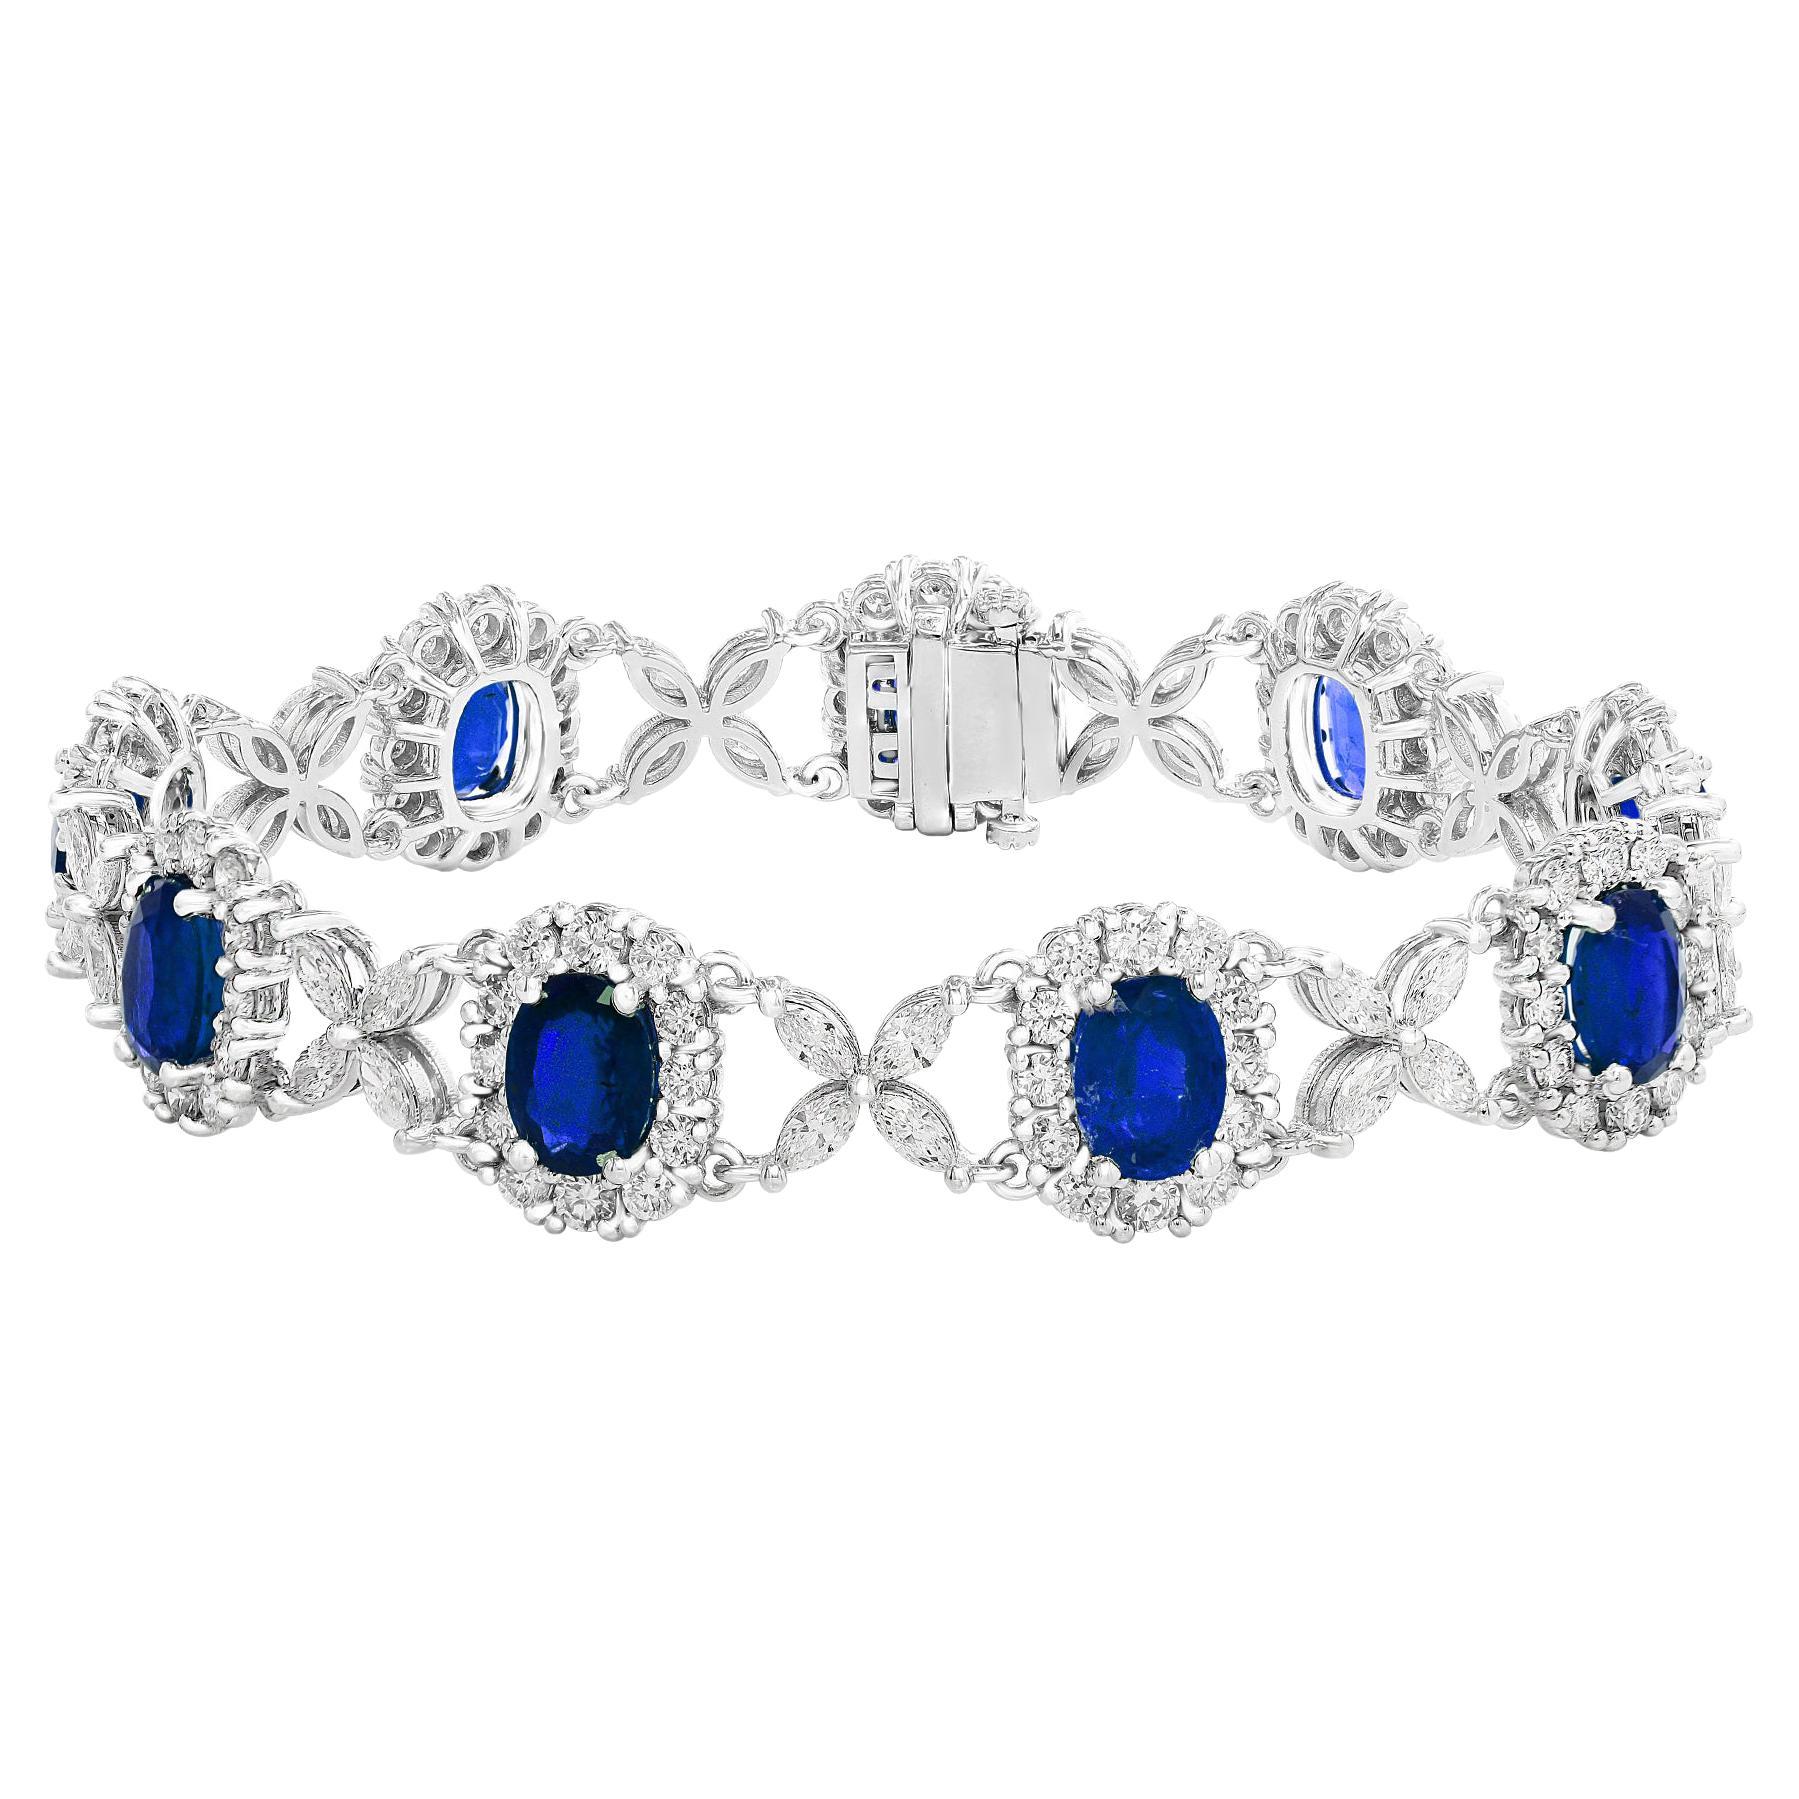 11.47 Carat Oval Cut Blue Sapphire and Diamond Tennis Bracelet in 14K White Gold For Sale